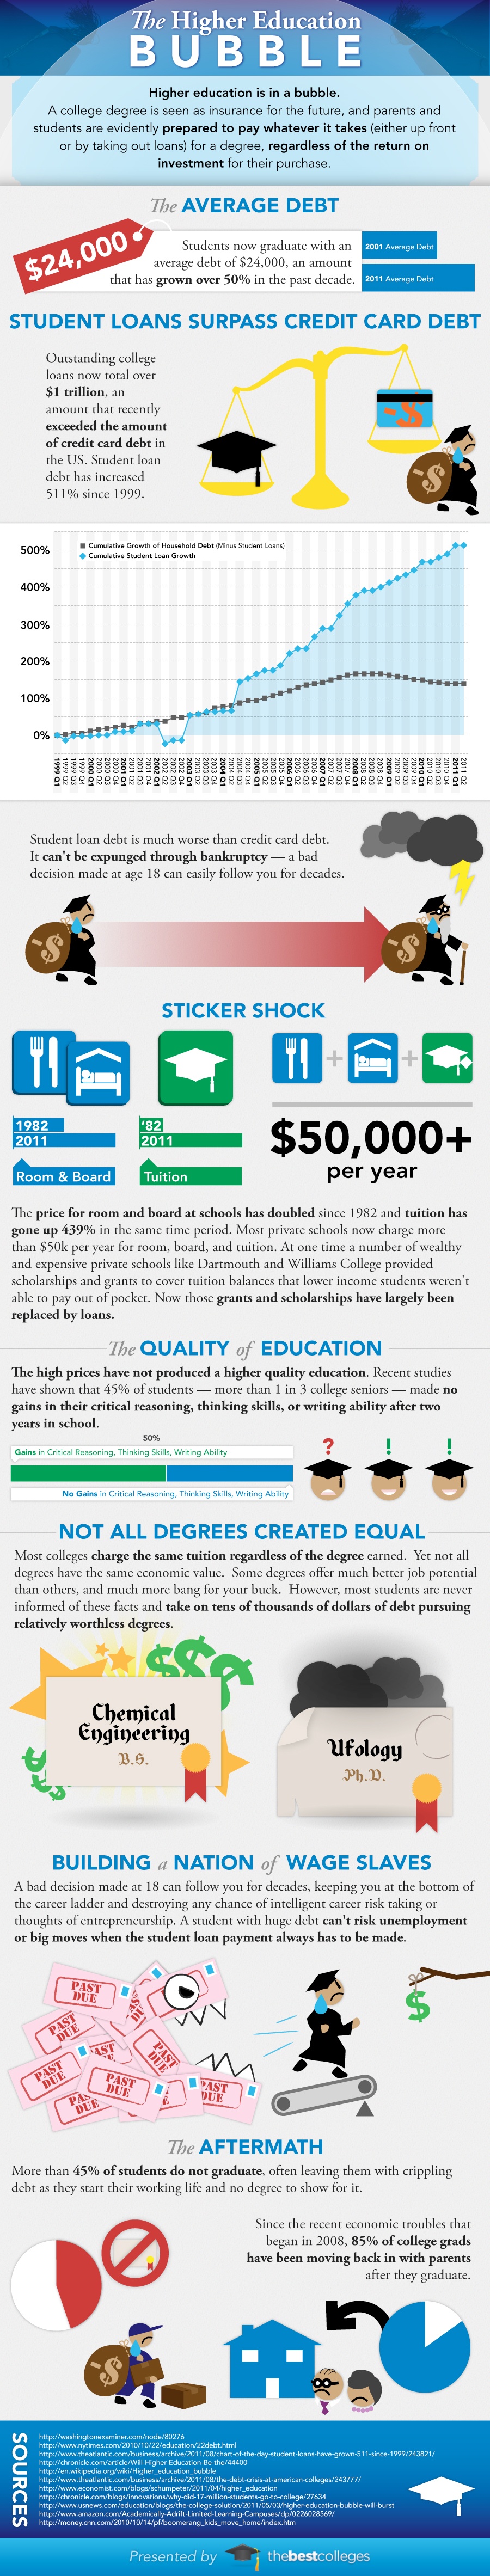 The Higher Education Bubble Infographic